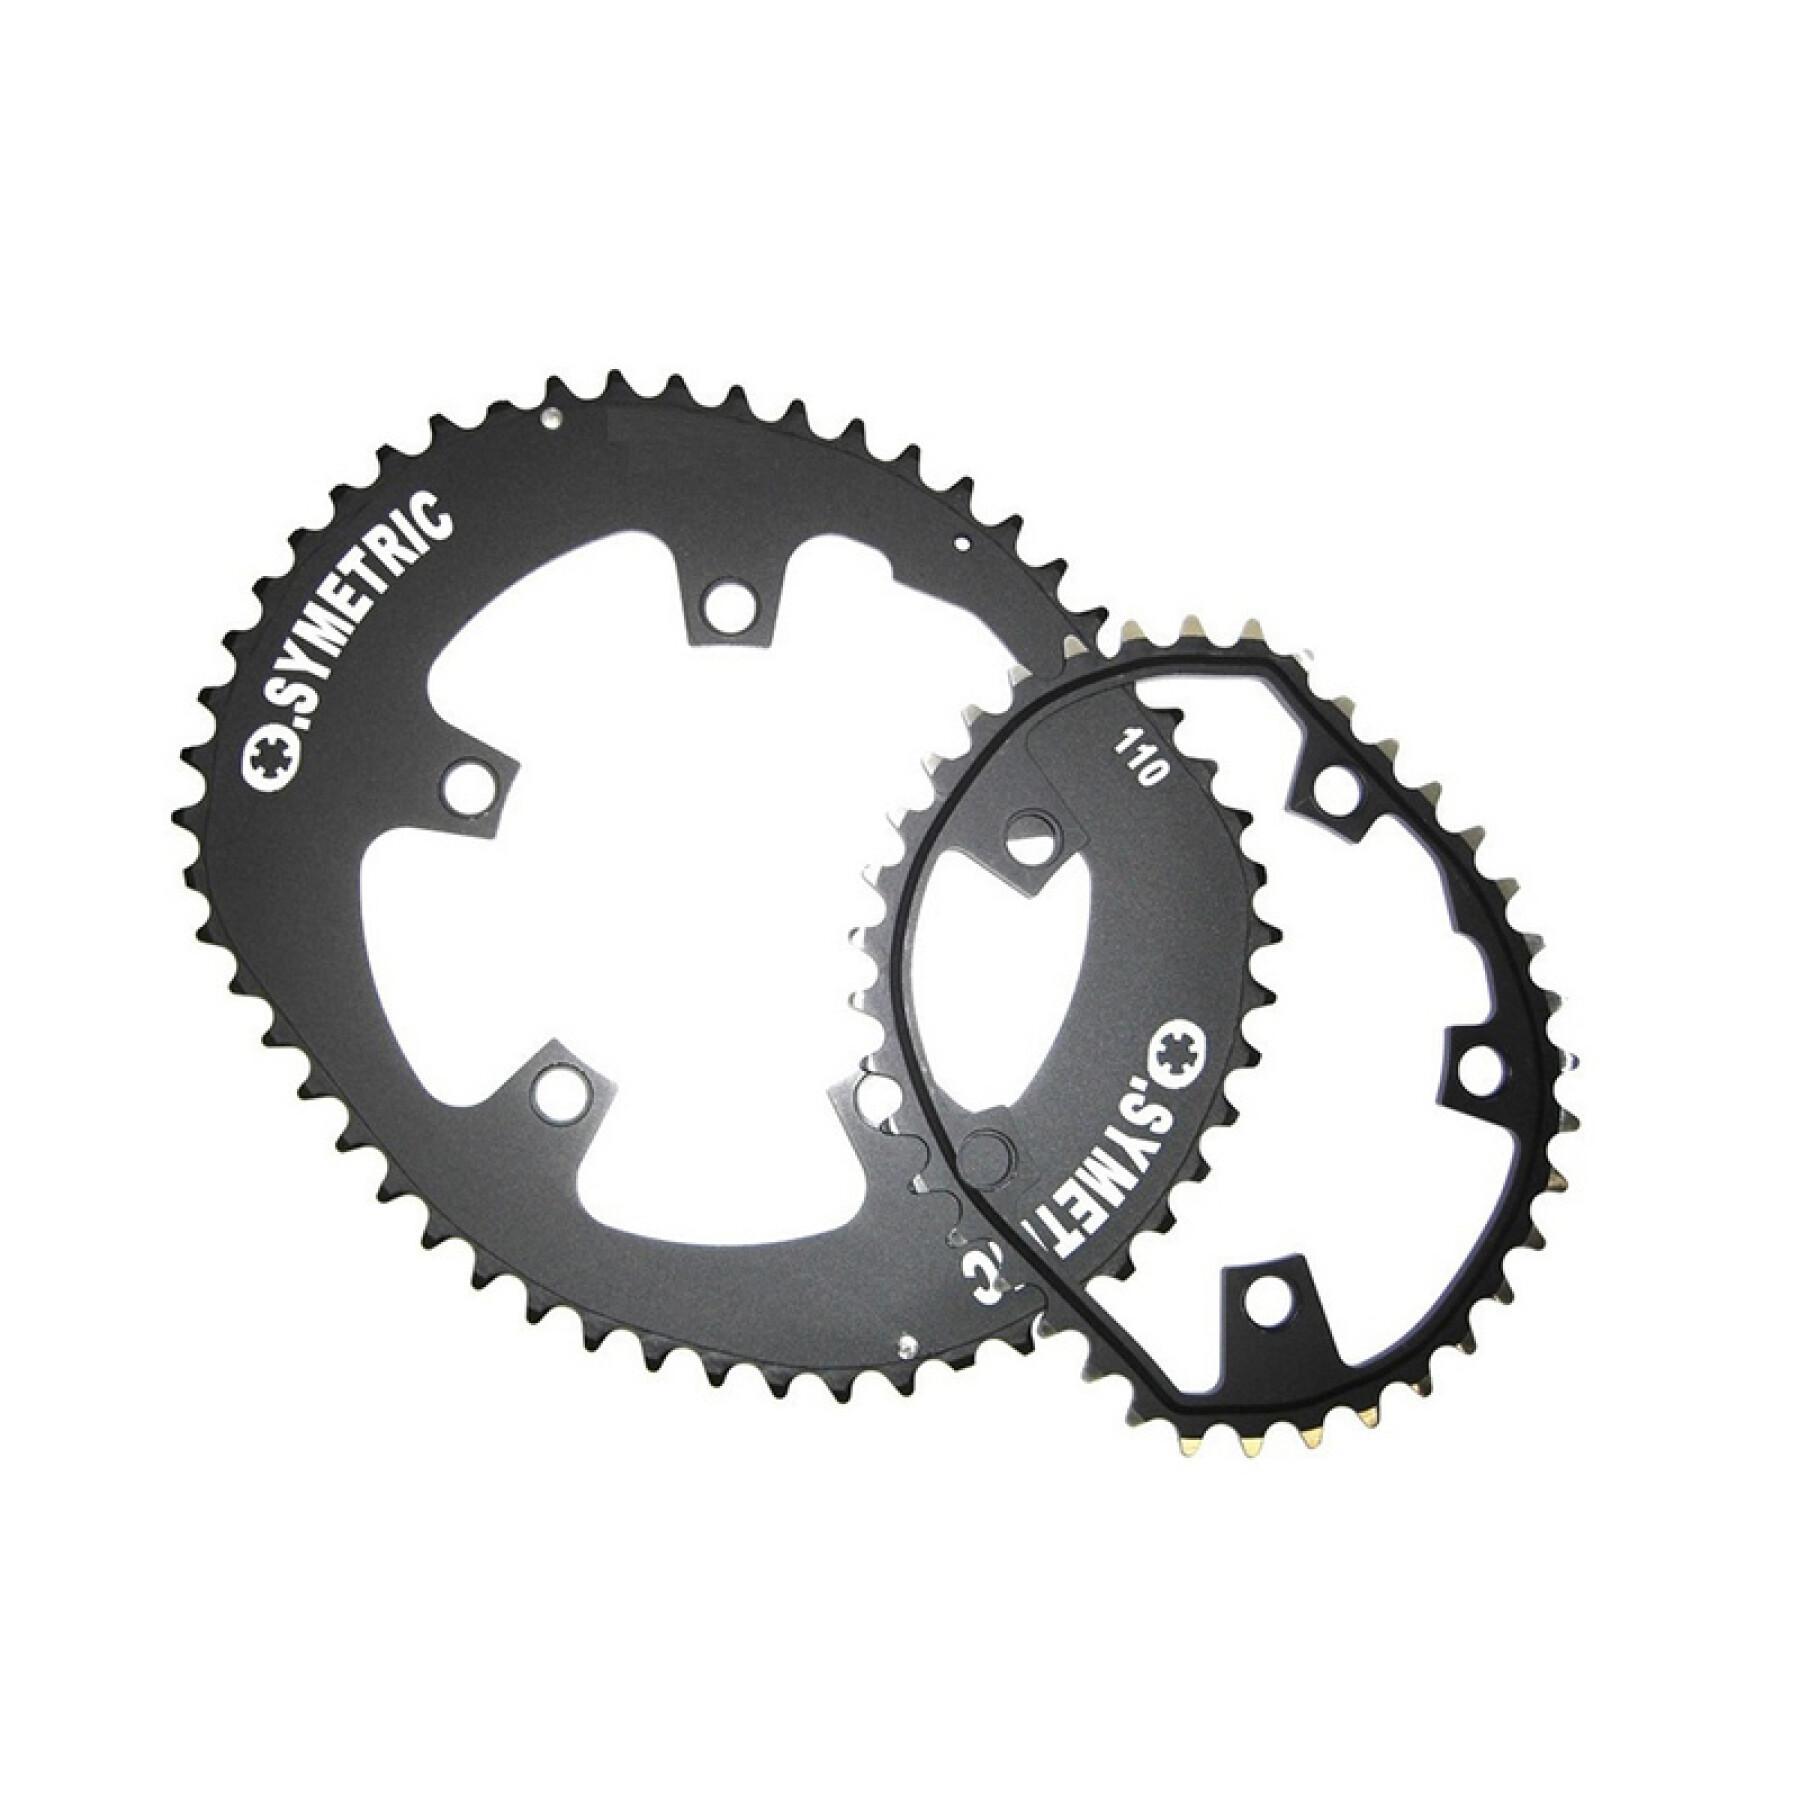 Plateaux osymetric 4 branches Stronglight 110 BCD Shimano FC9100 44 x 56 T